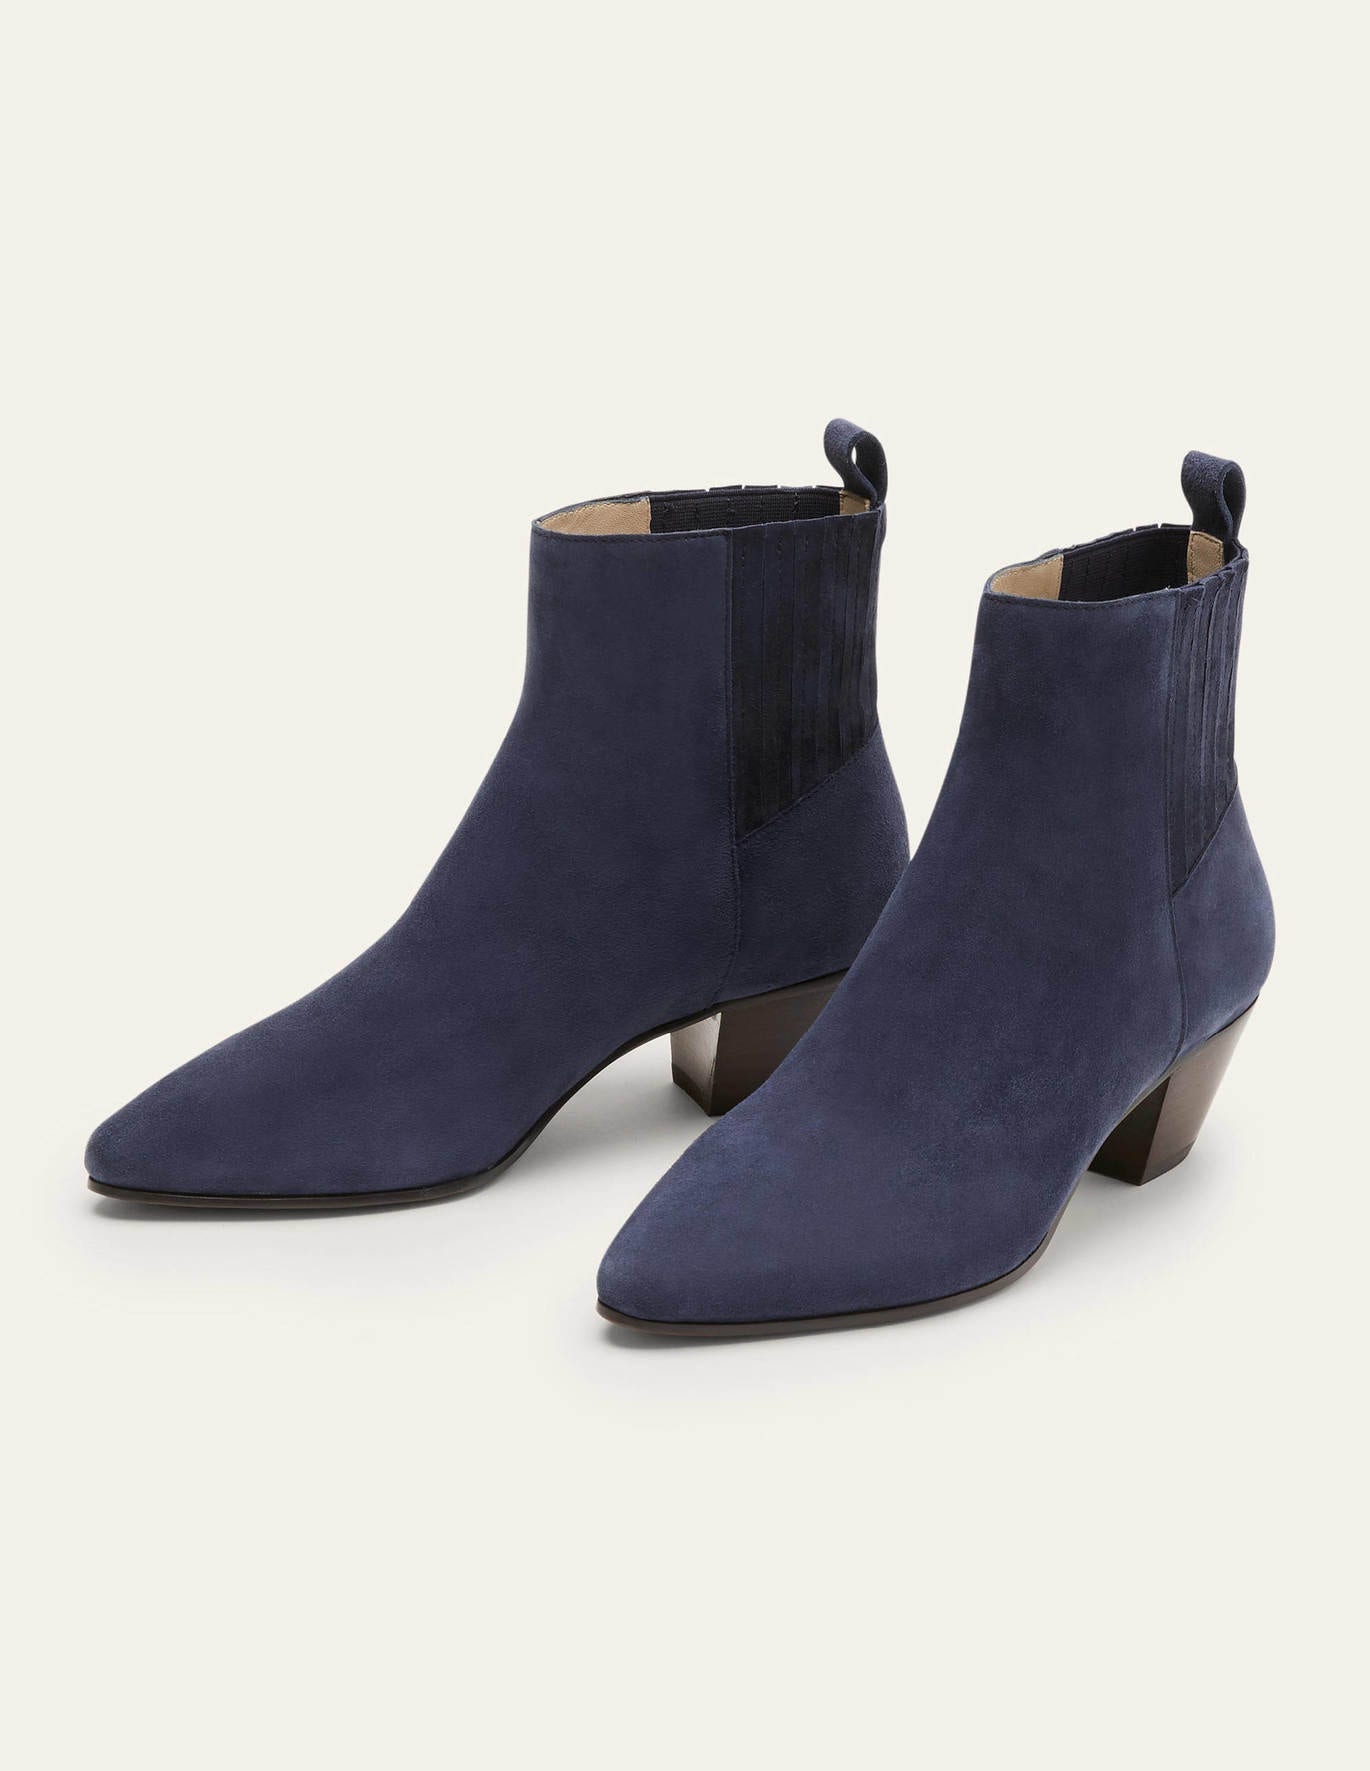 Boden Western Ankle Boots - Navy